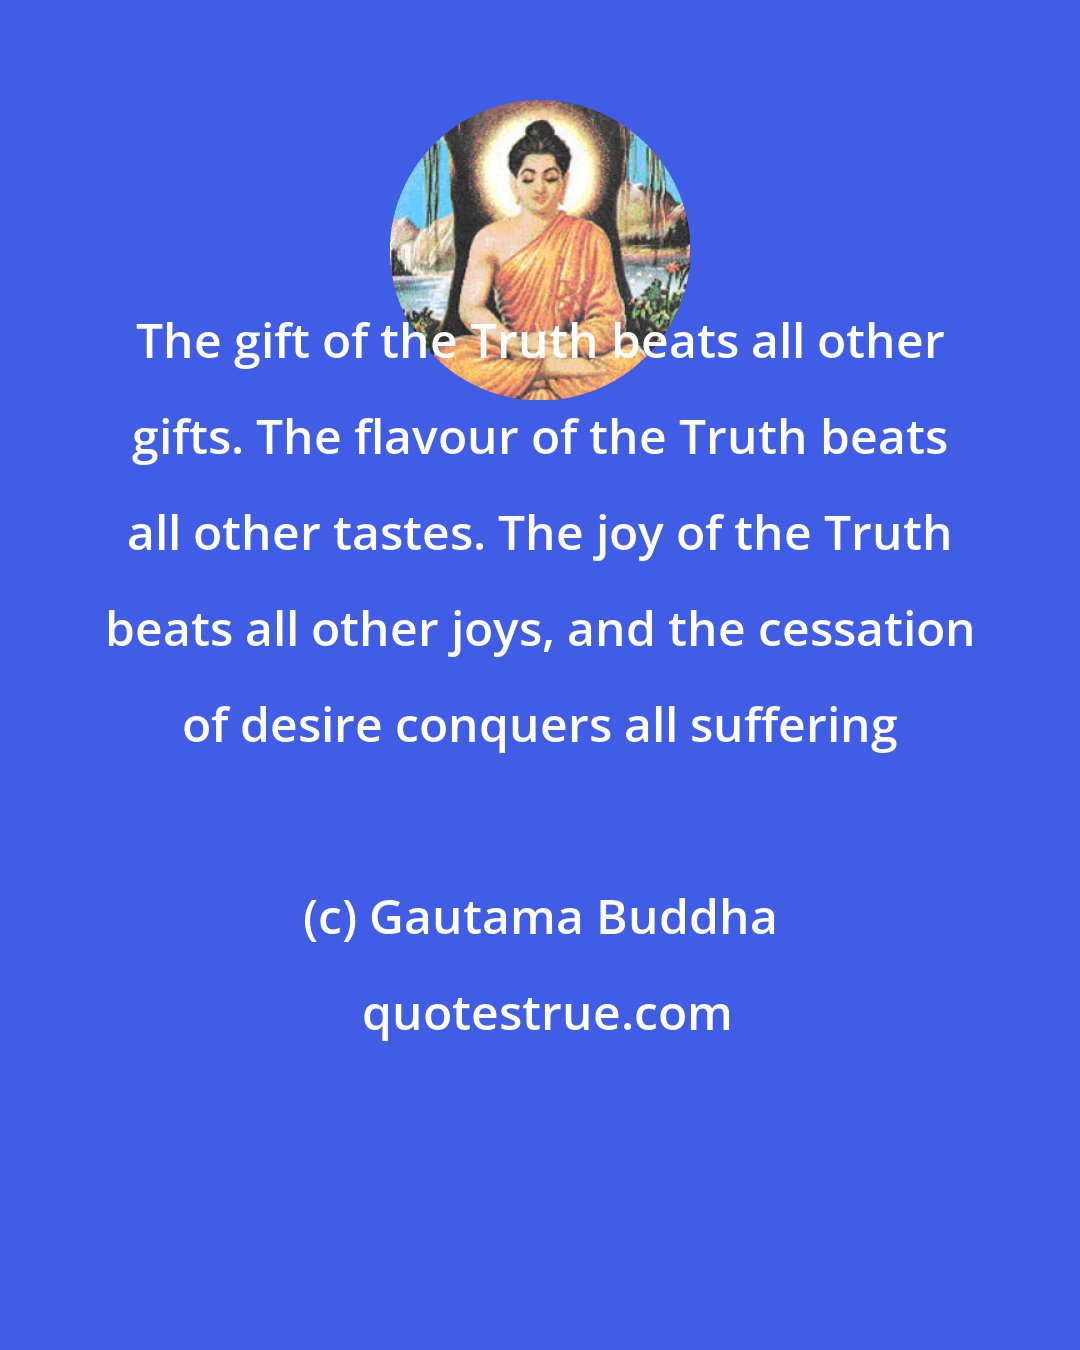 Gautama Buddha: The gift of the Truth beats all other gifts. The flavour of the Truth beats all other tastes. The joy of the Truth beats all other joys, and the cessation of desire conquers all suffering